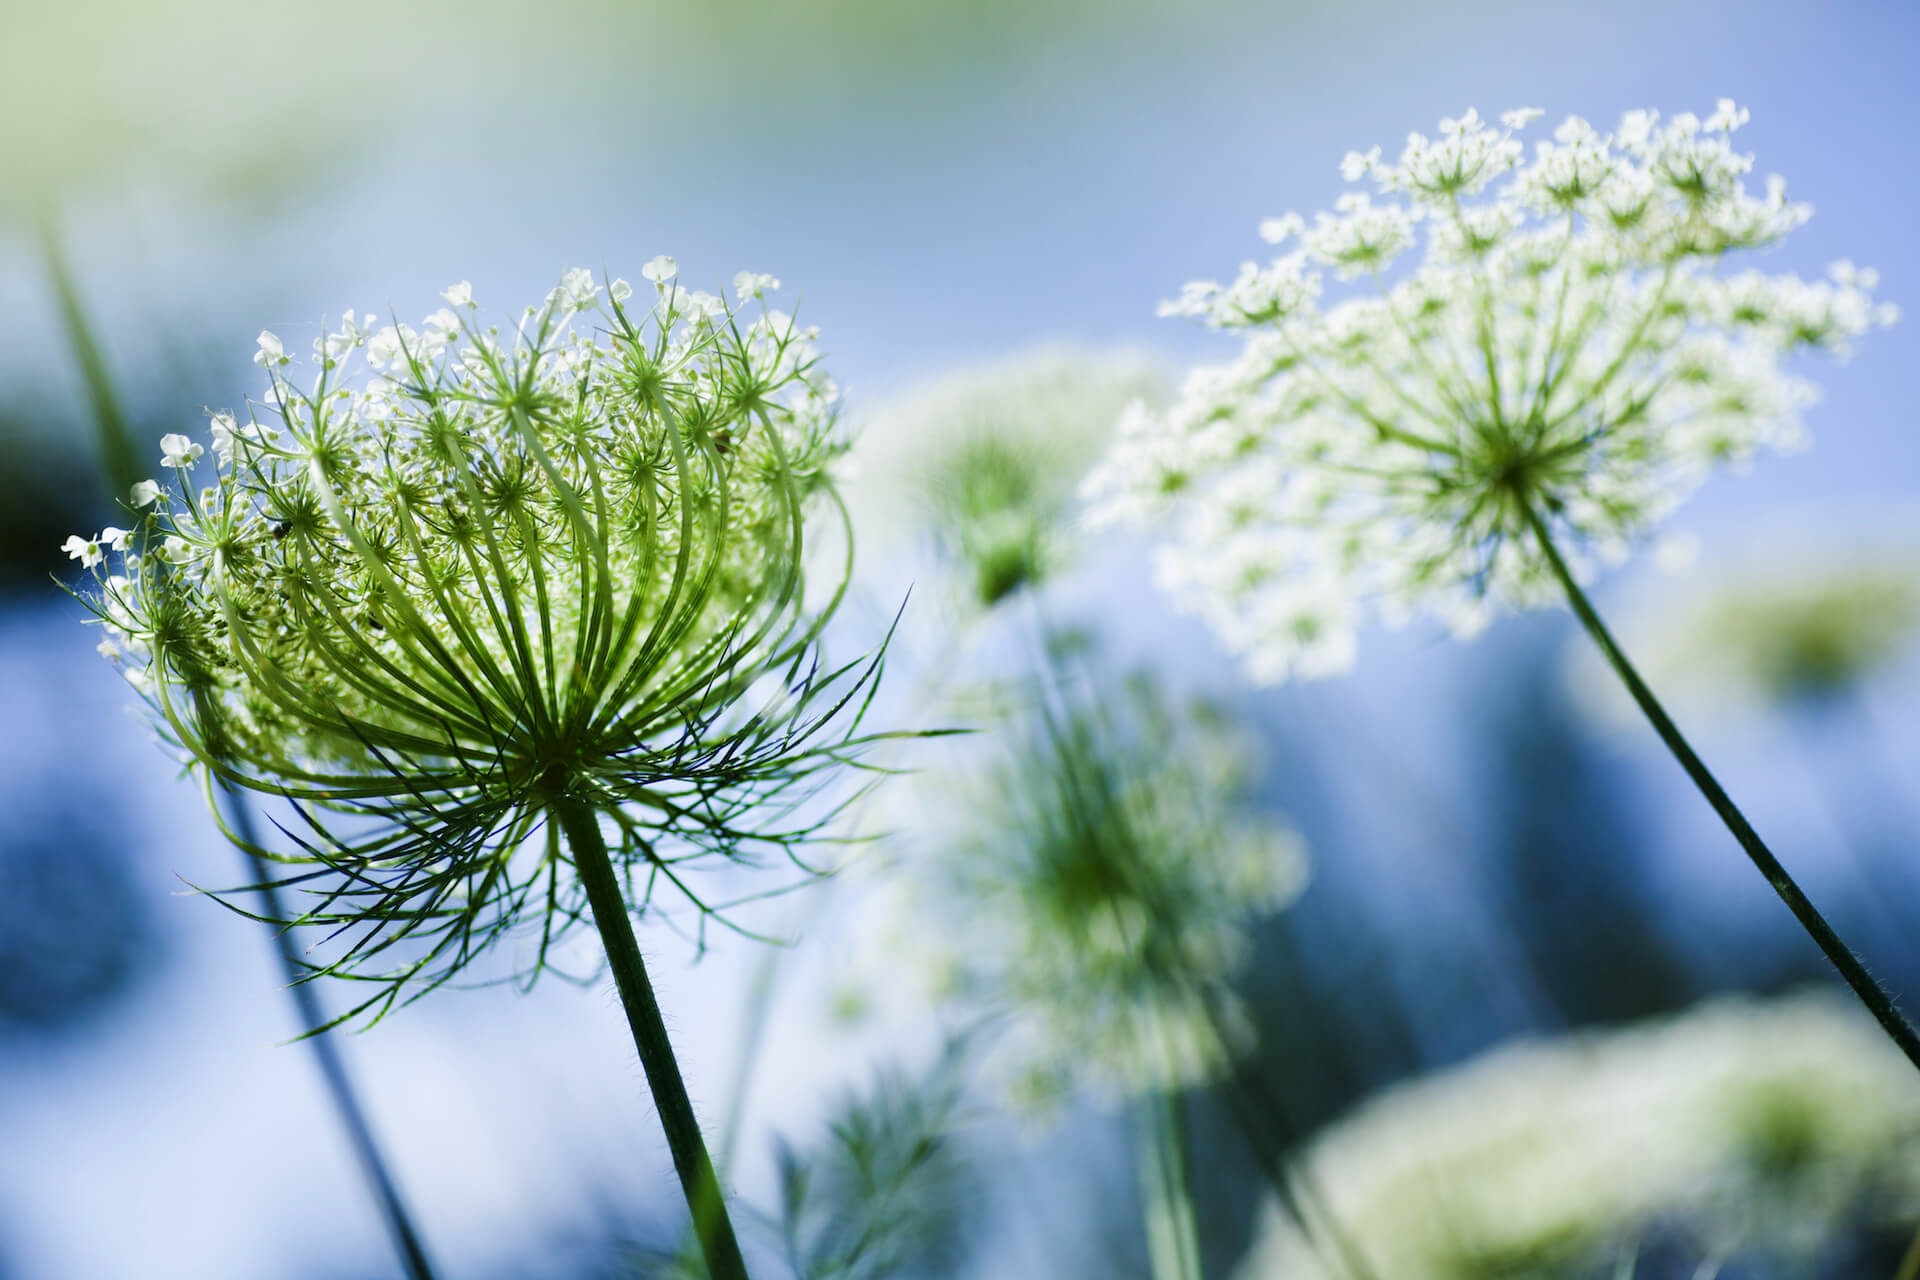 Growing Queen Anne’s Lace